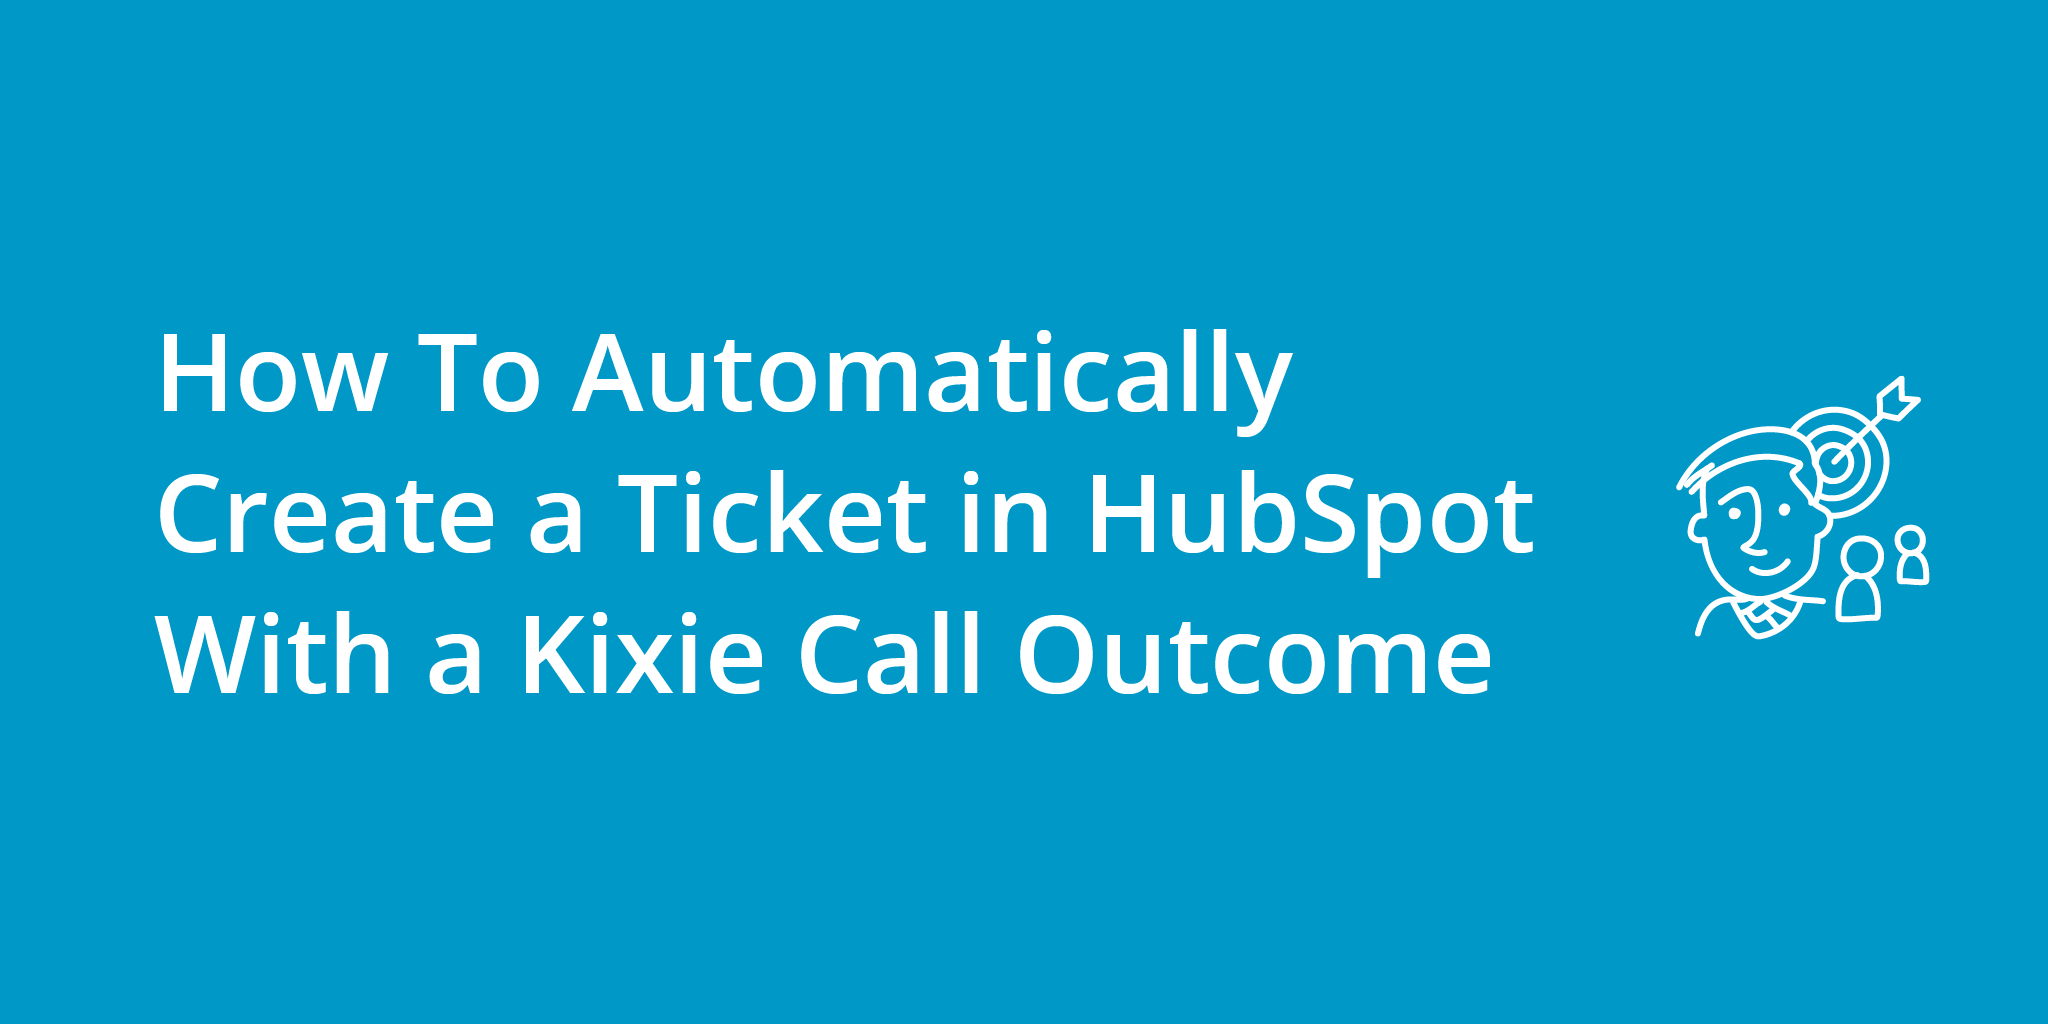 How To Automatically Create a Ticket in HubSpot With a Kixie Call Outcome